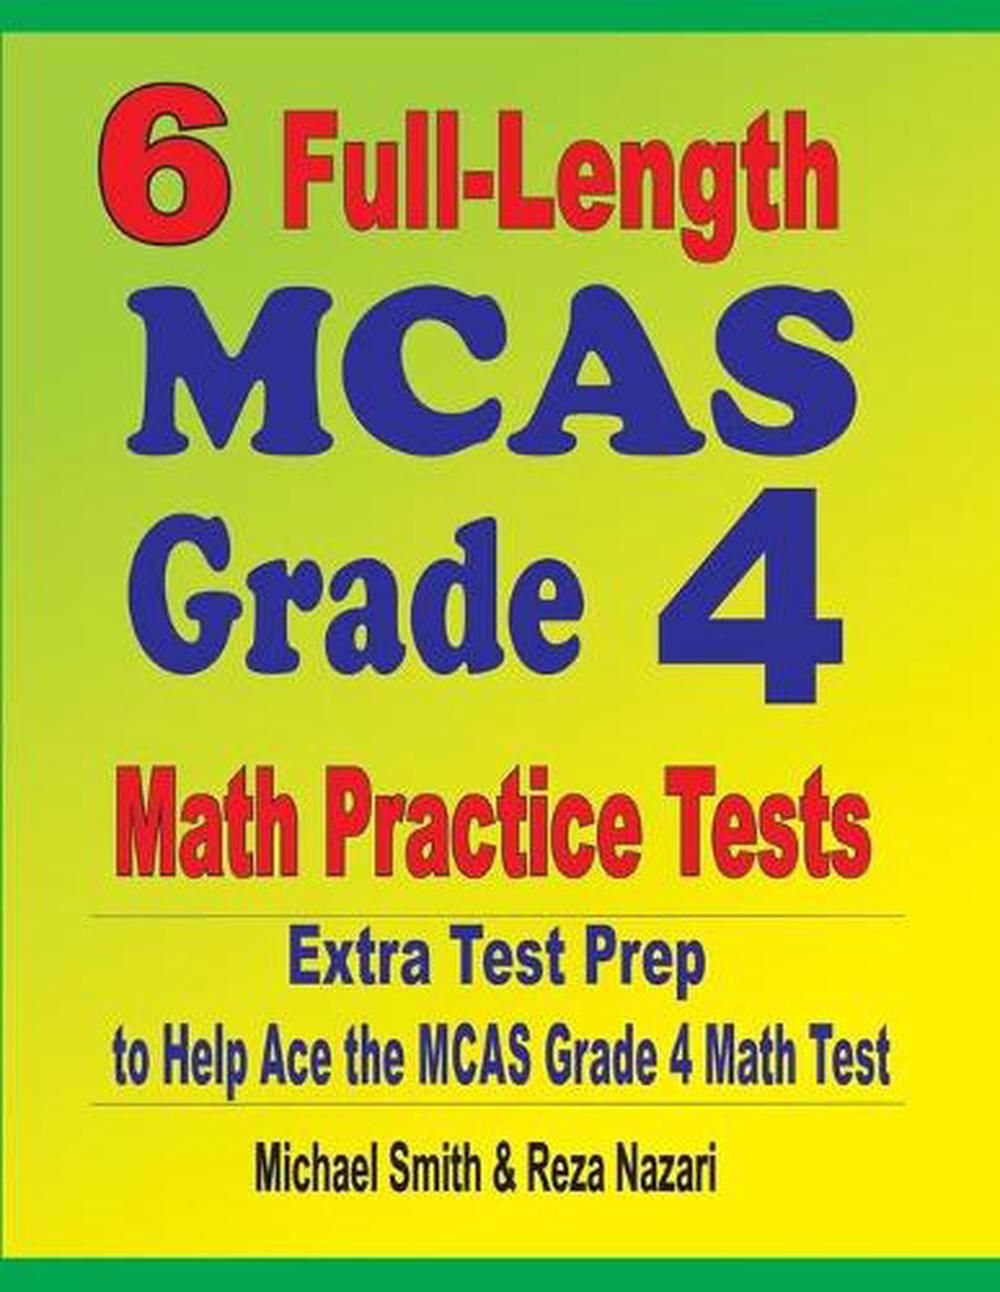 6-full-length-mcas-grade-4-math-practice-tests-extra-test-prep-to-help-ace-the-9781646127689-ebay